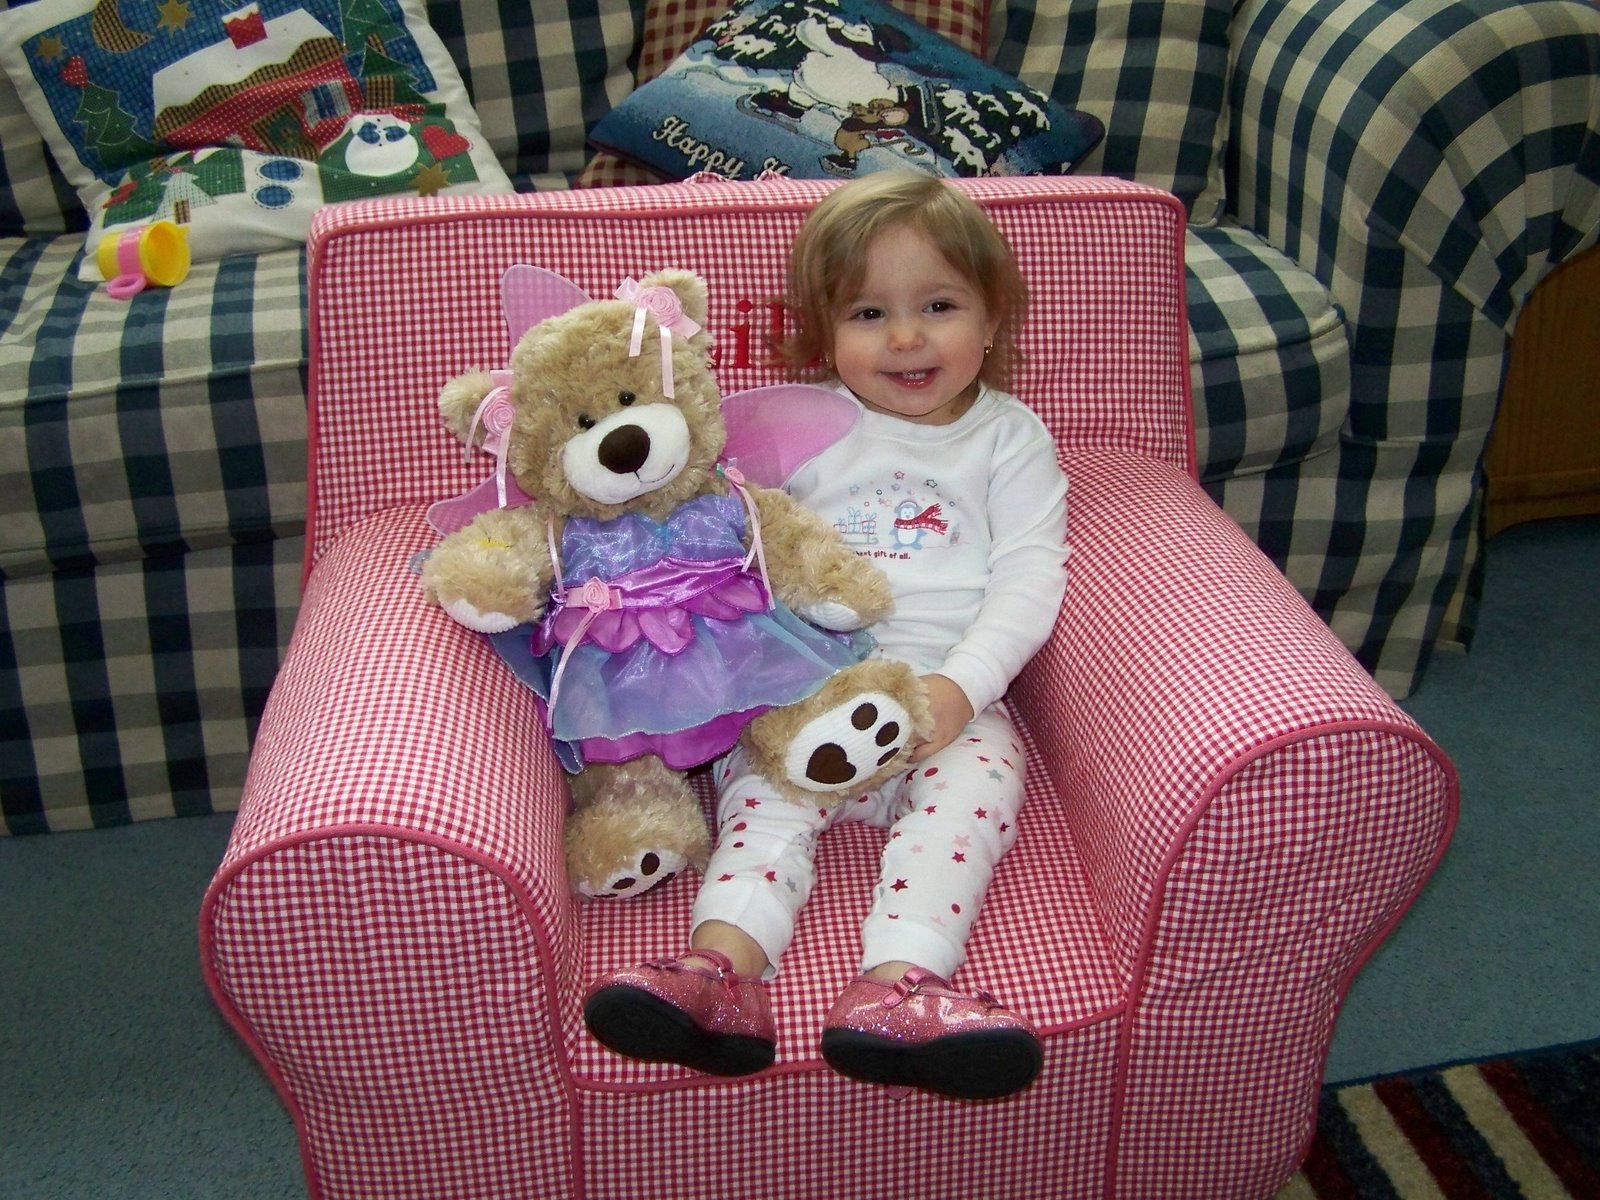 [Lily+in+chair+with+bear.jpg]